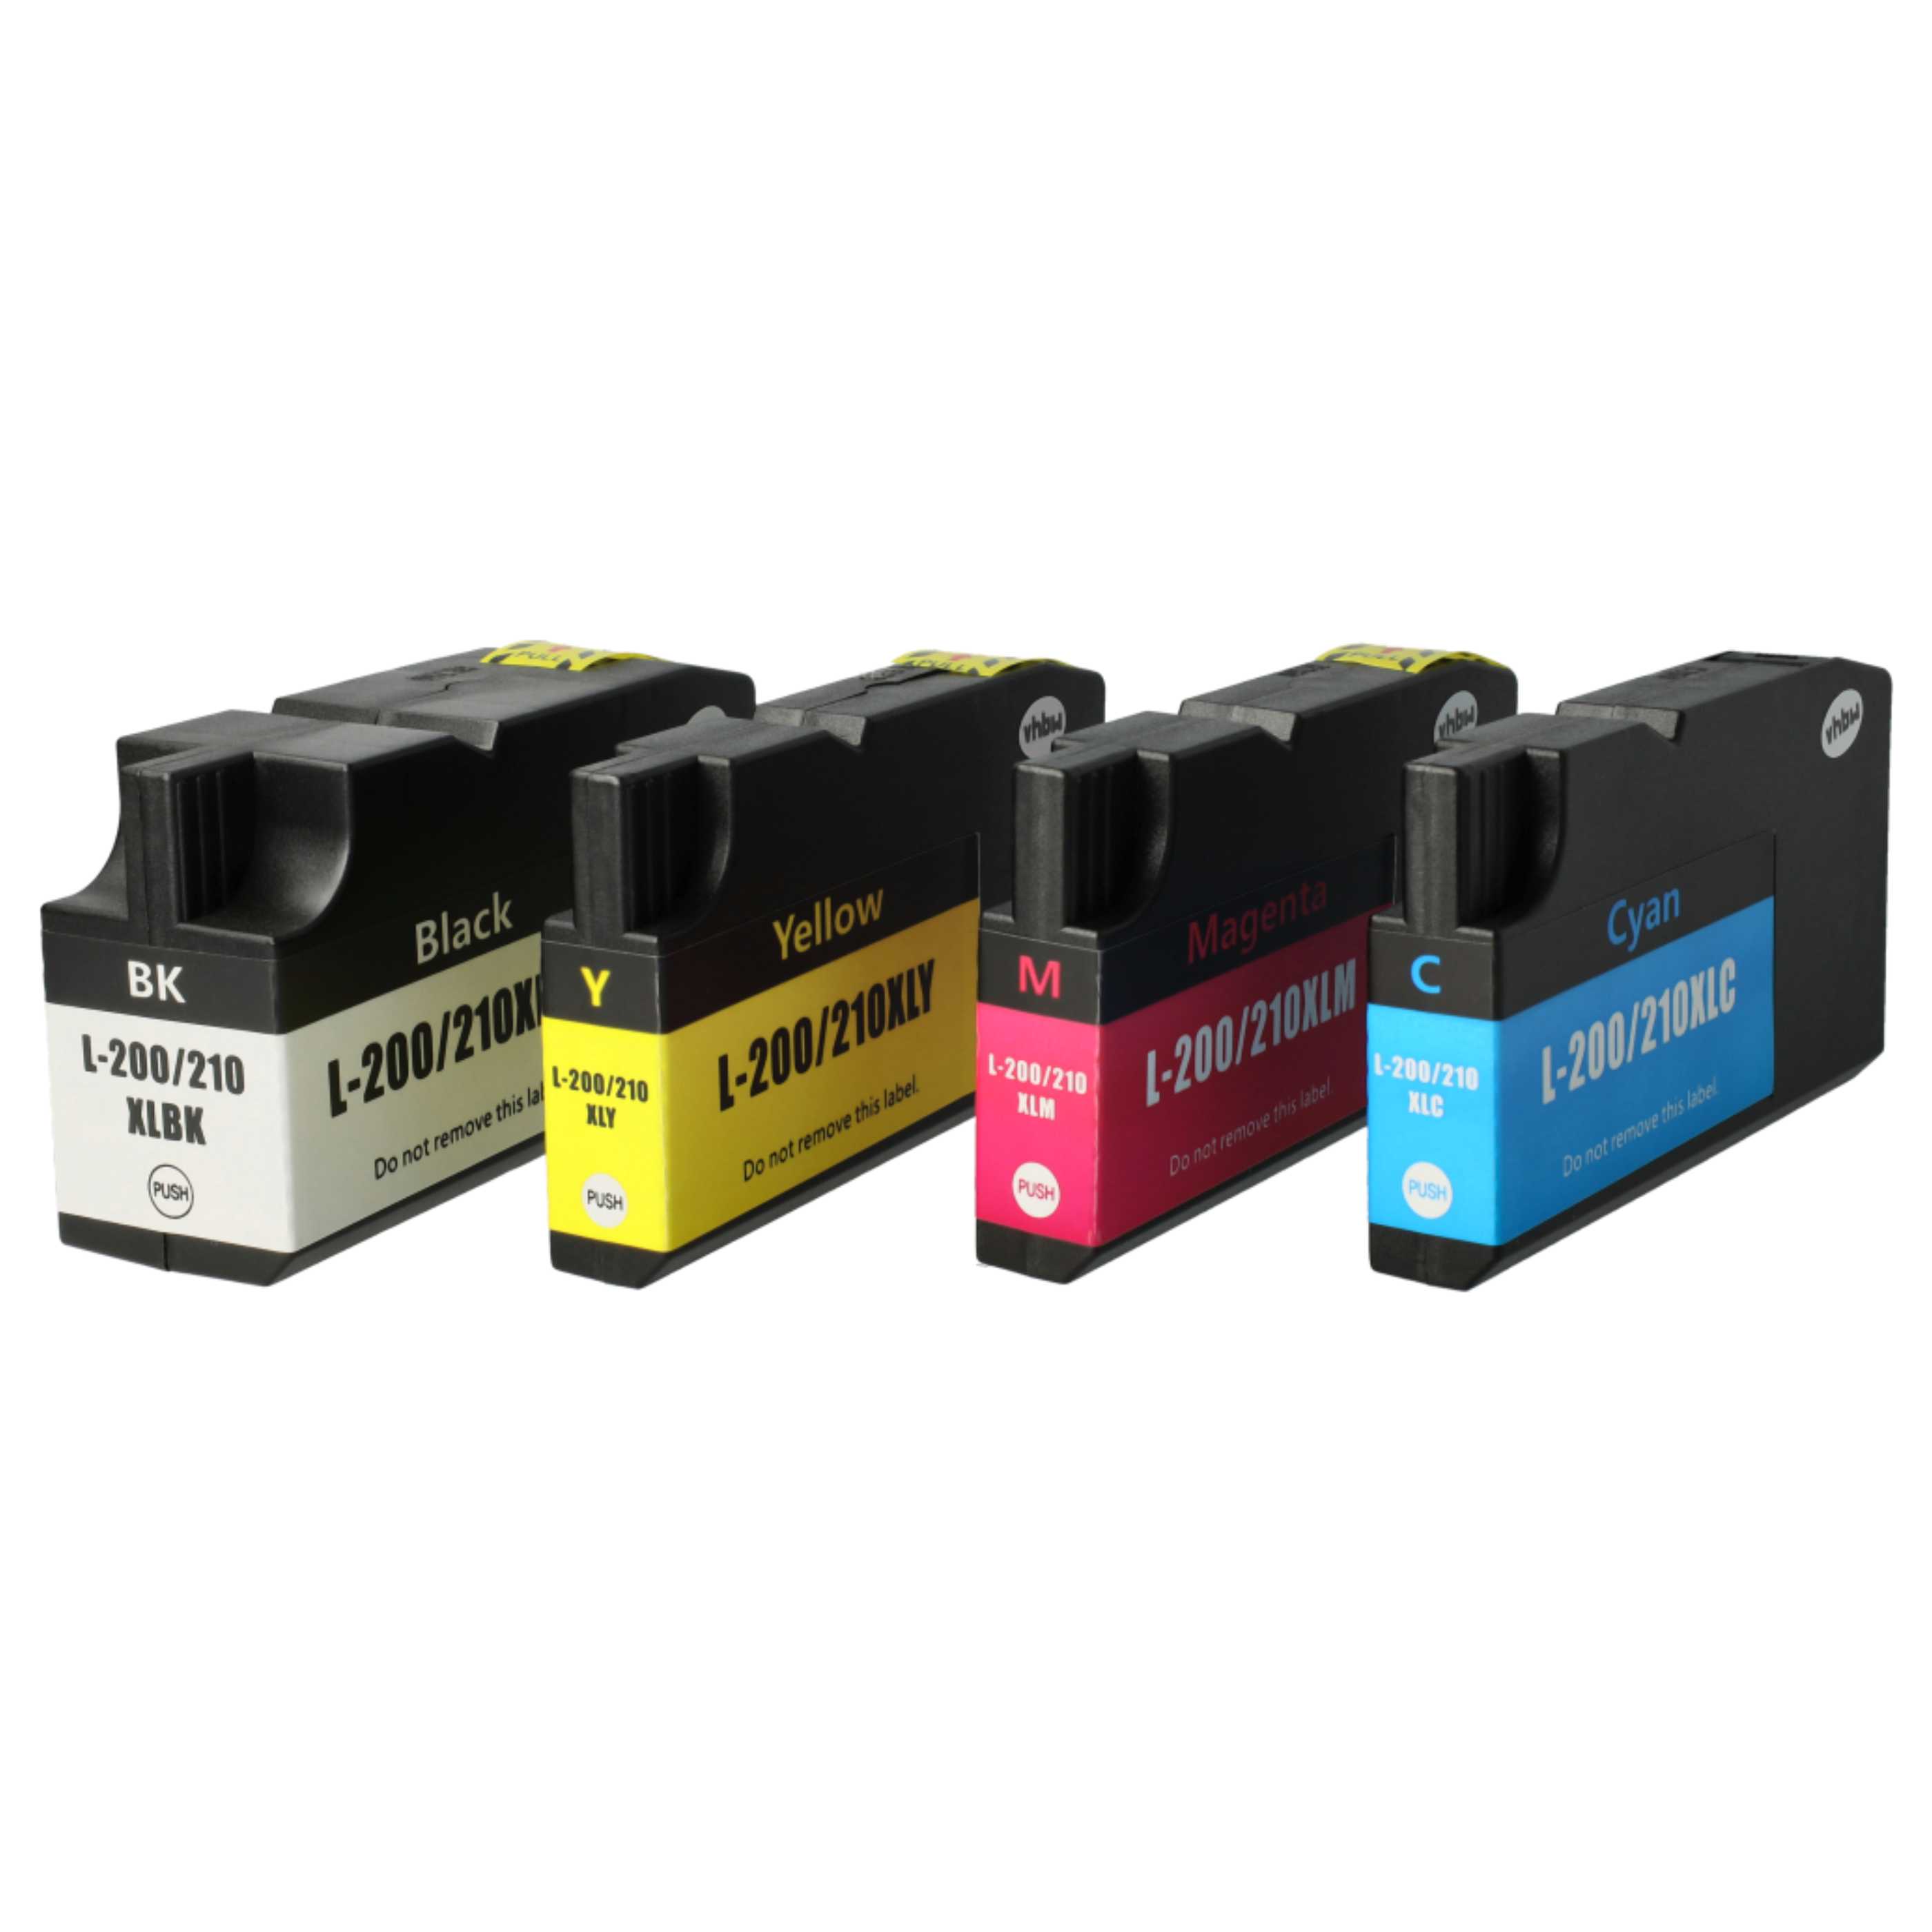 4x Ink Cartridges replaces Lexmark 200XL for Pro 4000 Printer - B/C/M/Y